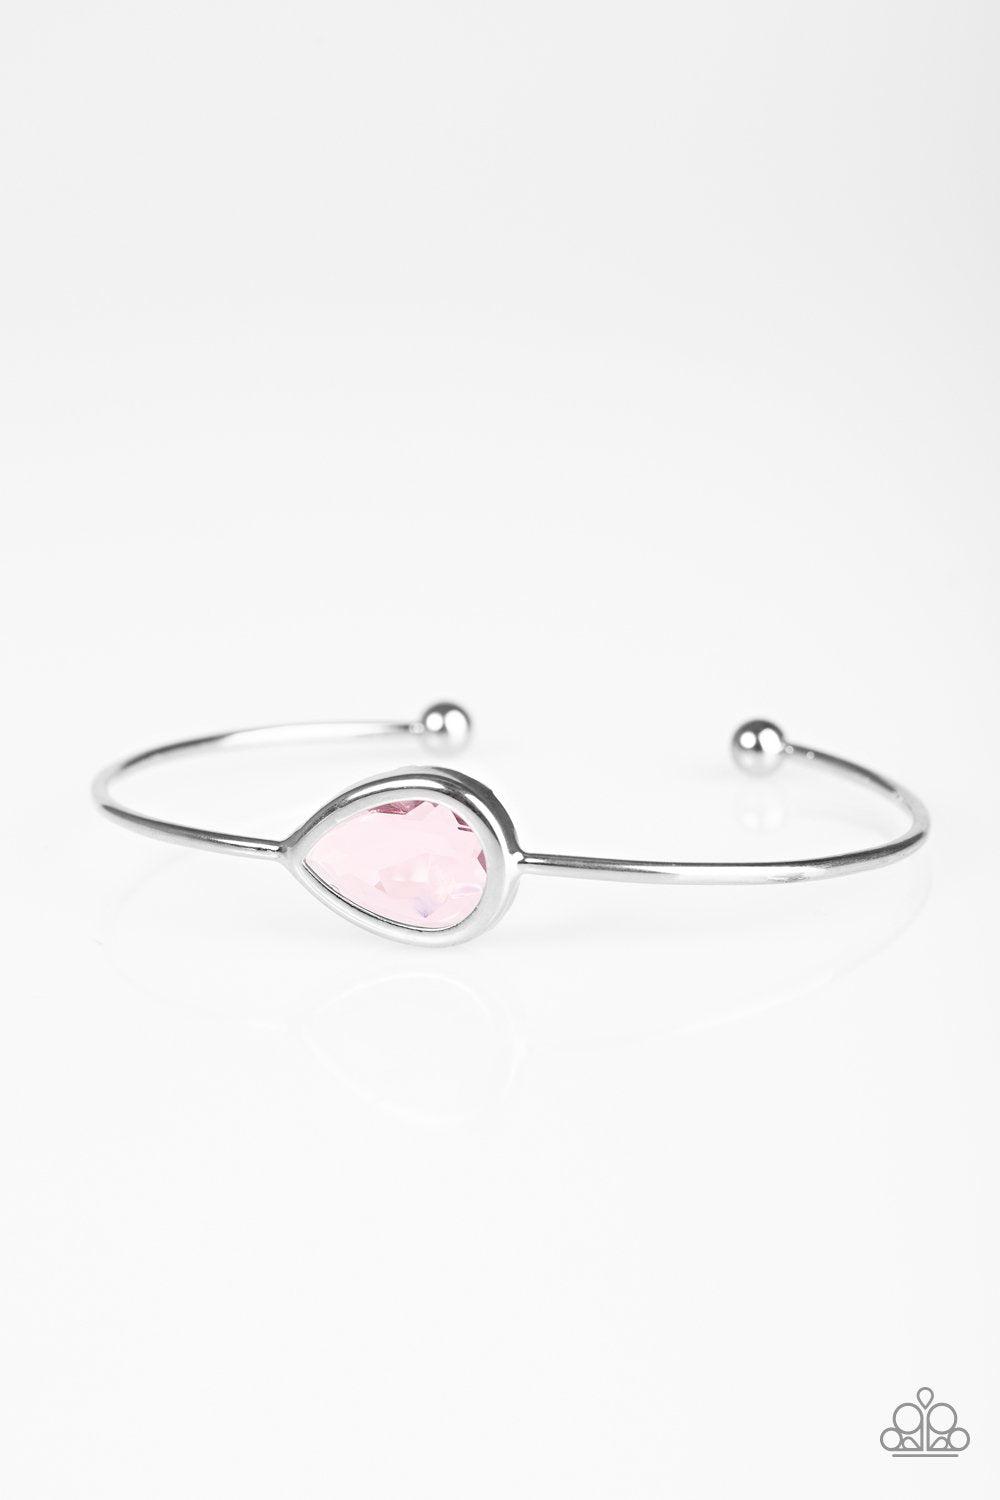 Make A Spectacle Pink Rhinestone and Silver Cuff Bracelet - Paparazzi Accessories-CarasShop.com - $5 Jewelry by Cara Jewels